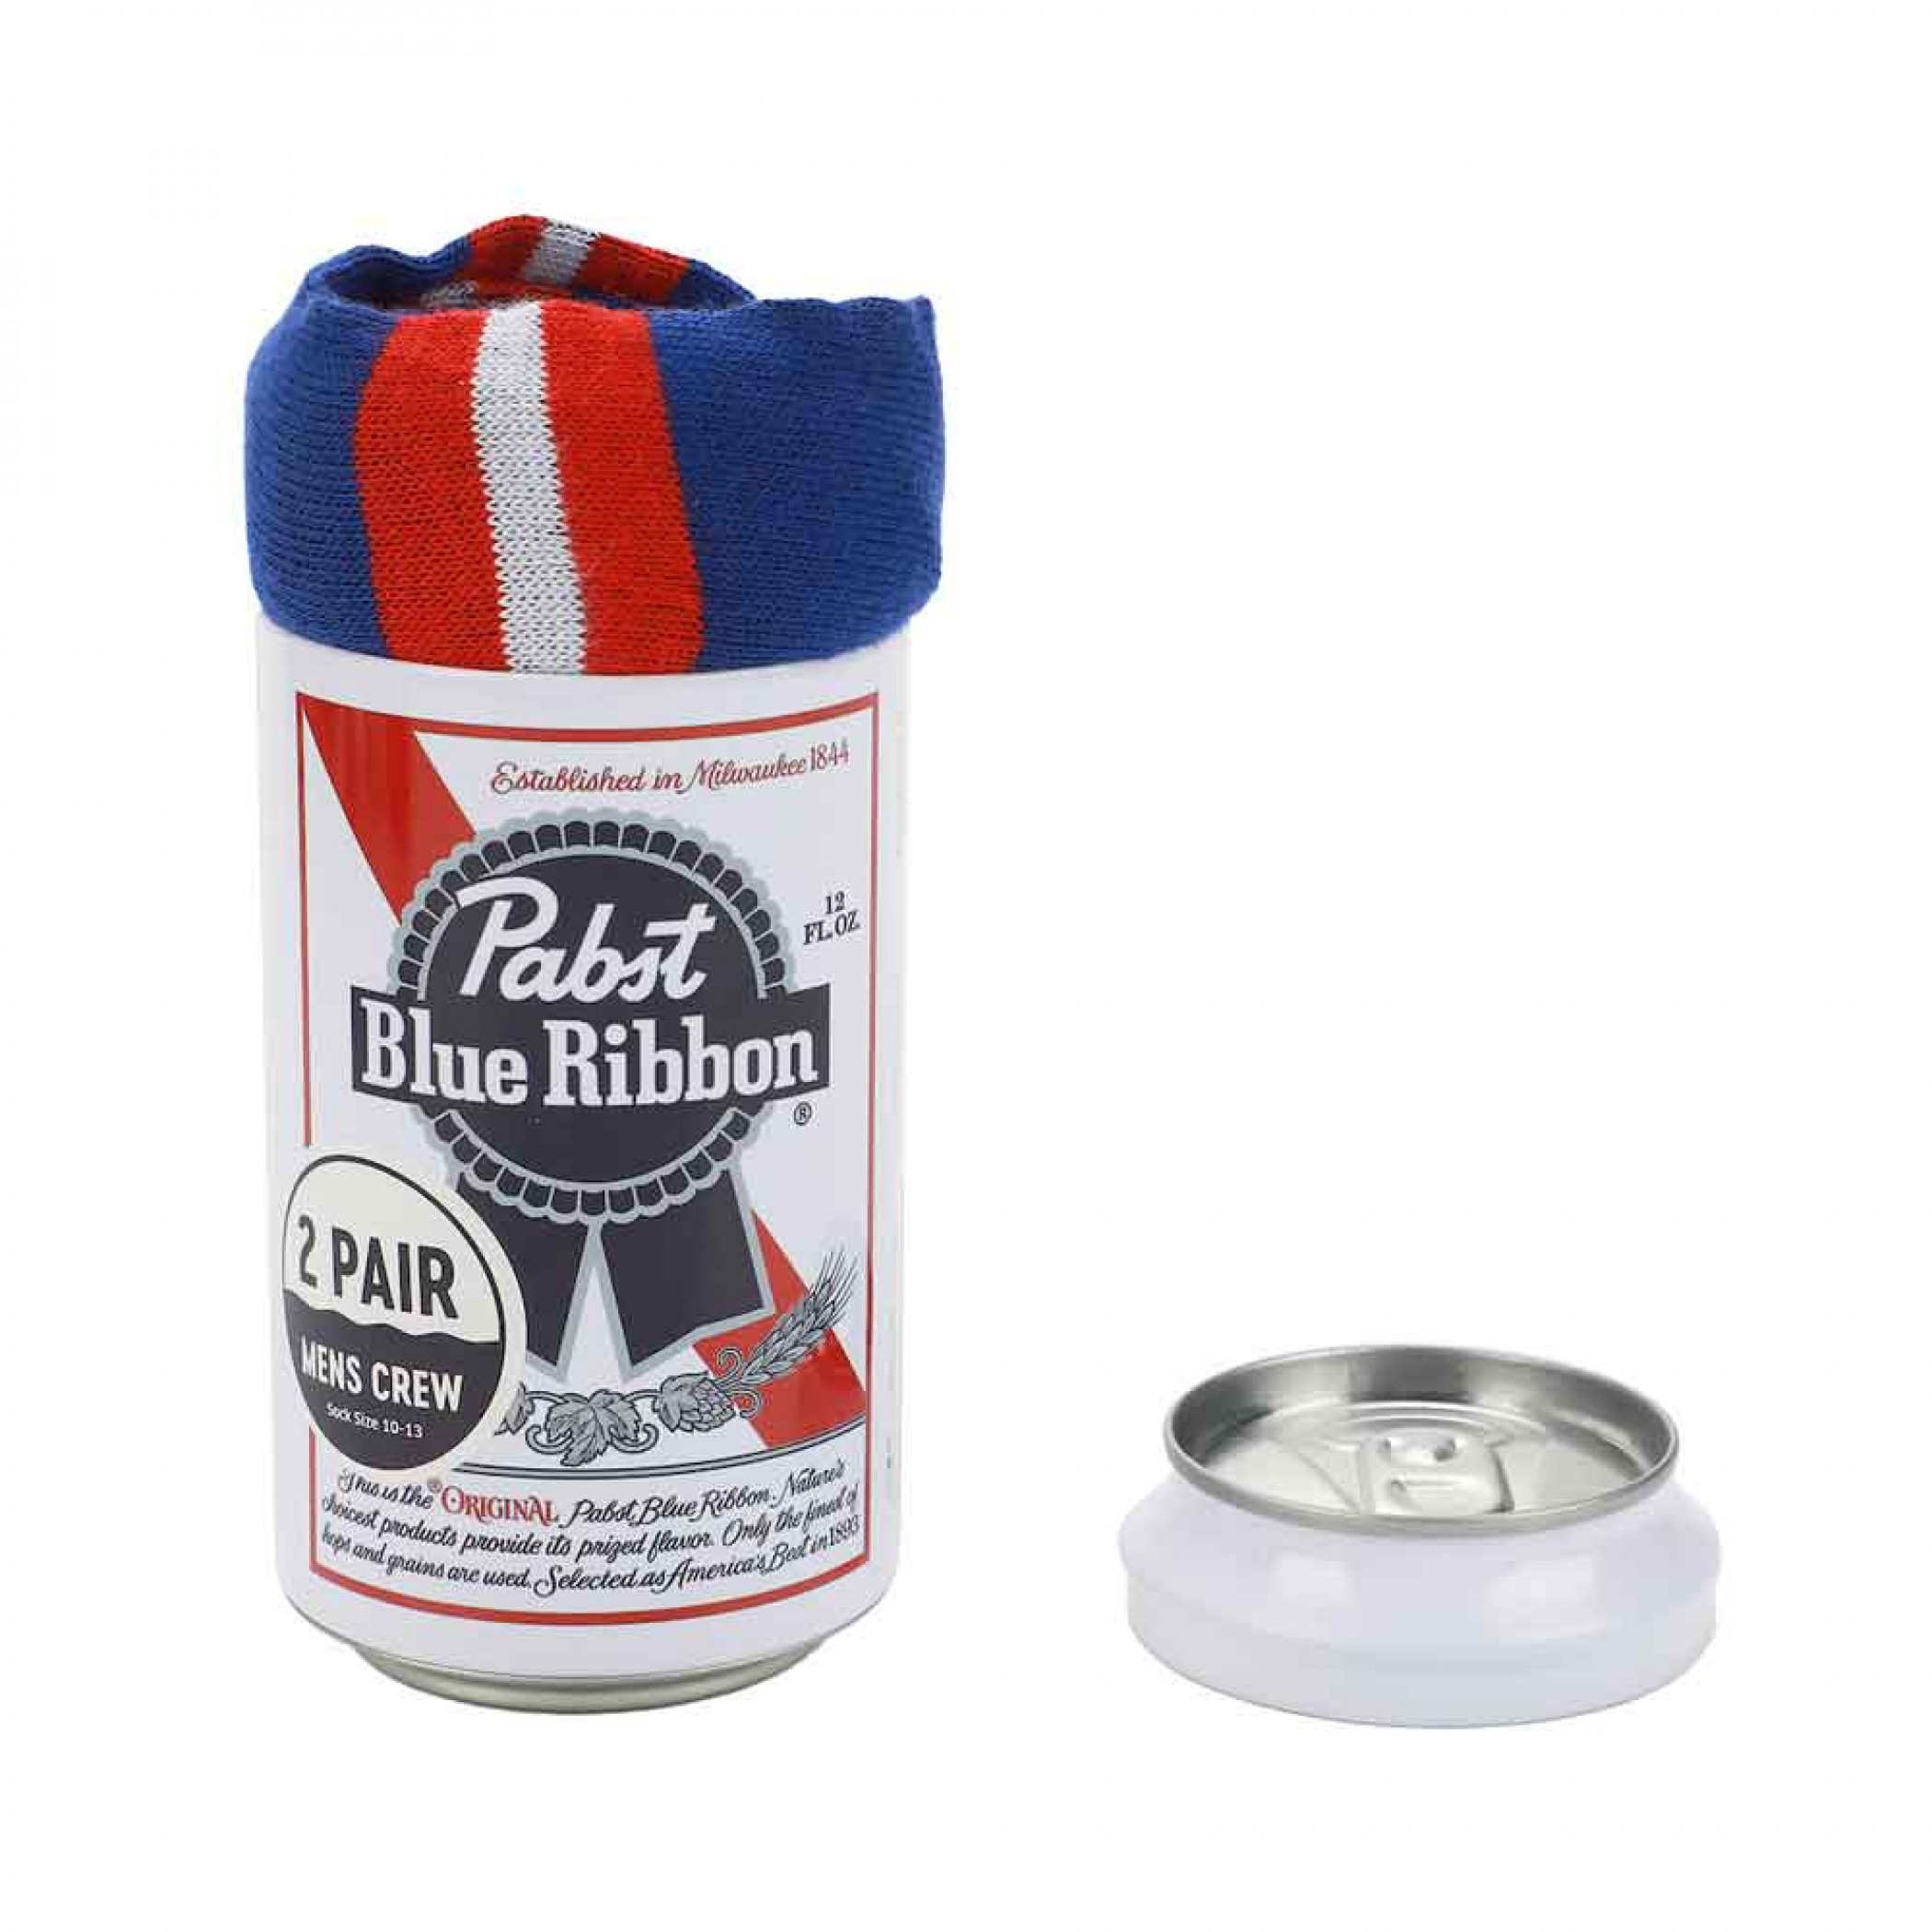 Pabst Blue Ribbon 2-Pairs of Crew Socks in Beer Can Set